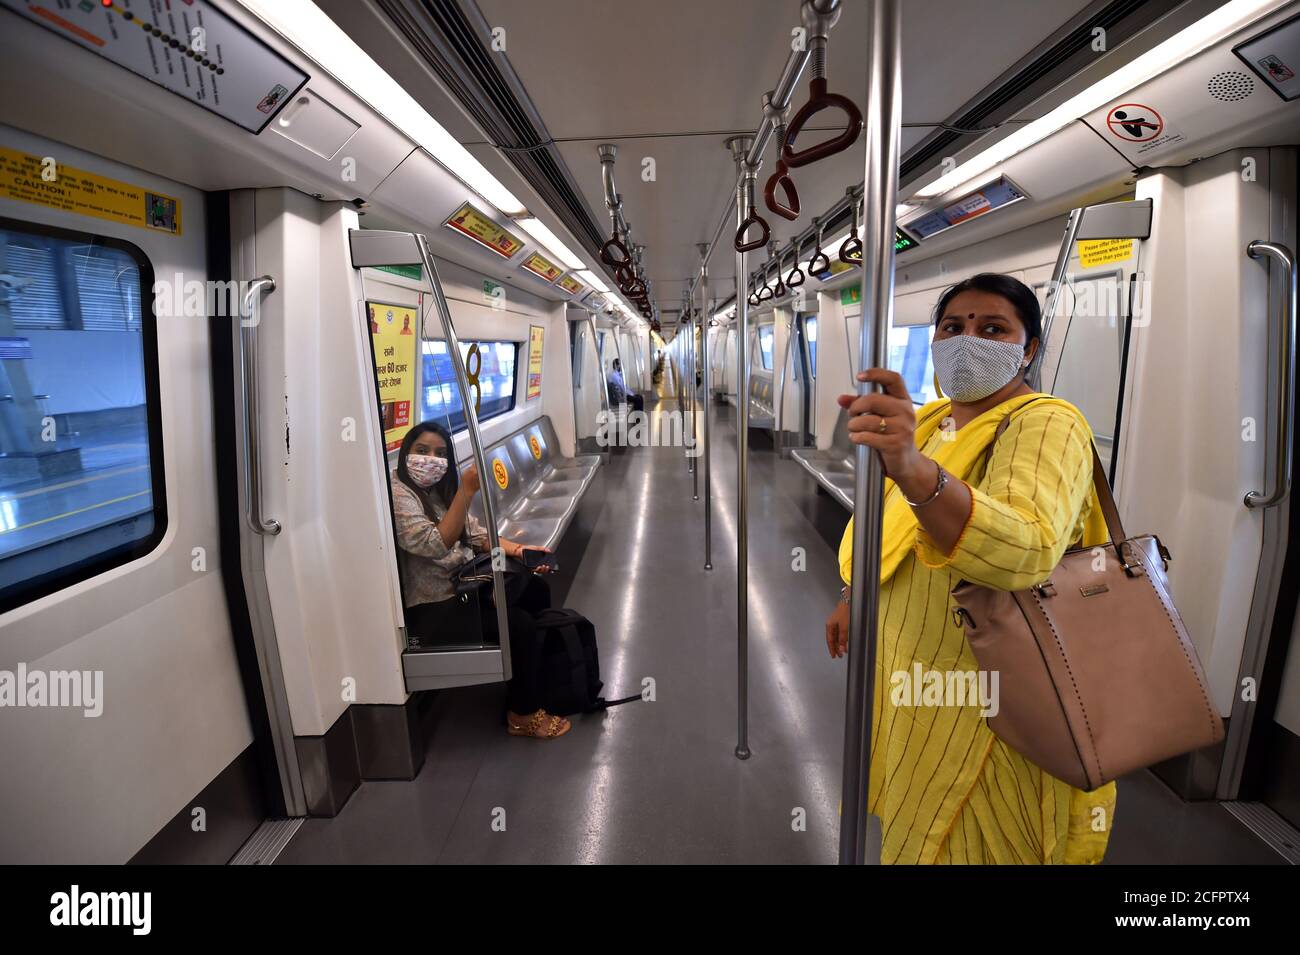 New Delhi, India. 7th September, 2020. Commuters travel in a metro train after Delhi Metro resumed services with curtailed operation of the Yellow Line and Rapid Metro, amid the ongoing corona virus pandemic, in New Delhi. India's coronavirus cases are now the second-highest in the world and only behind the United States, as the caseload crosses Brazil on a day when urban metro trains partially resume service in the capital New Delhi. Credit: PRASOU/Alamy Live News Stock Photo